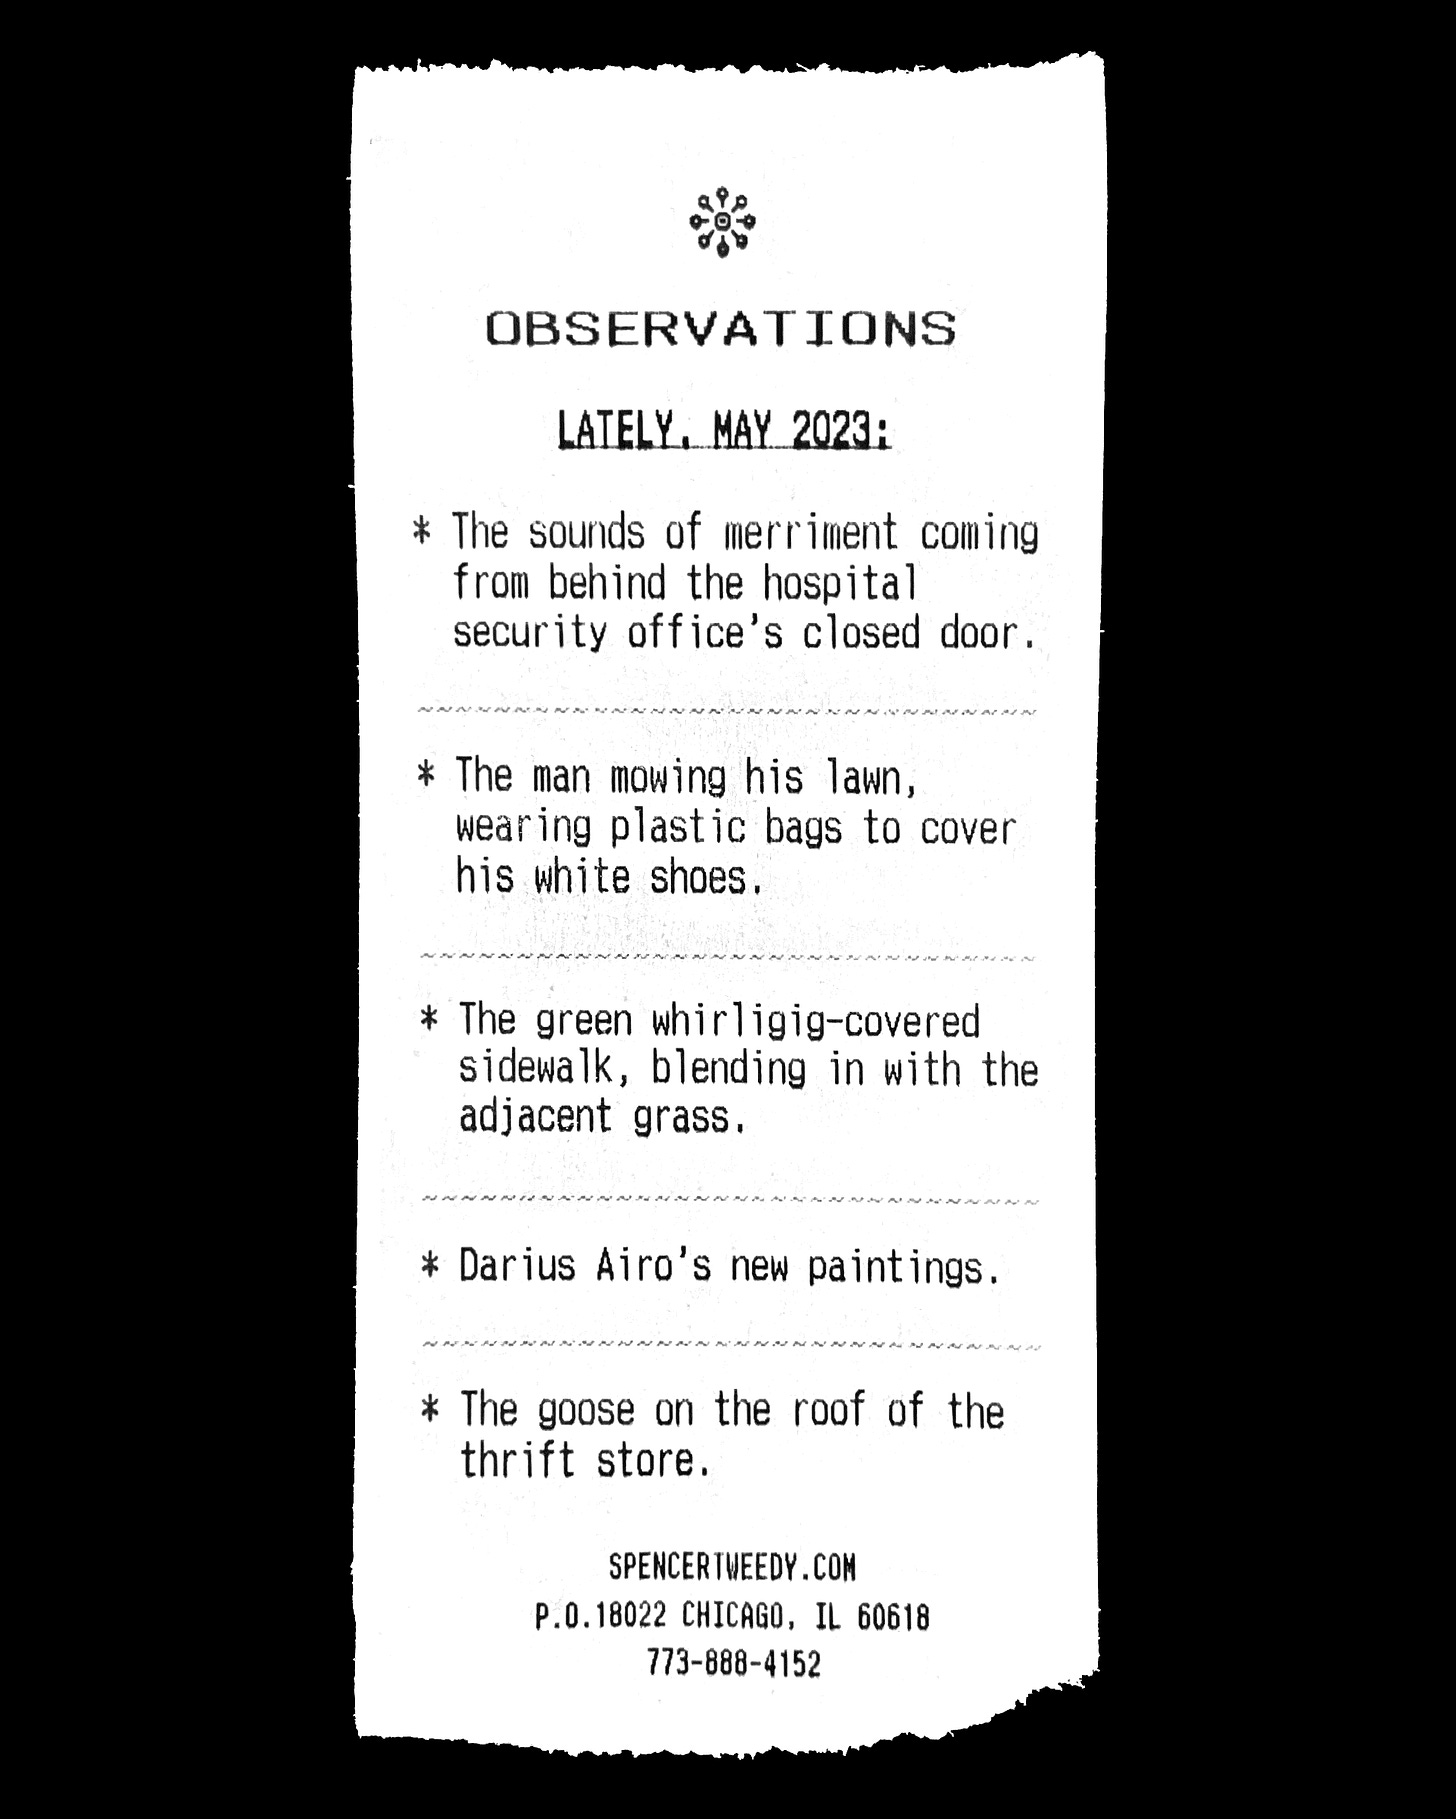 A scan of a paper receipt displaying the text of this post.